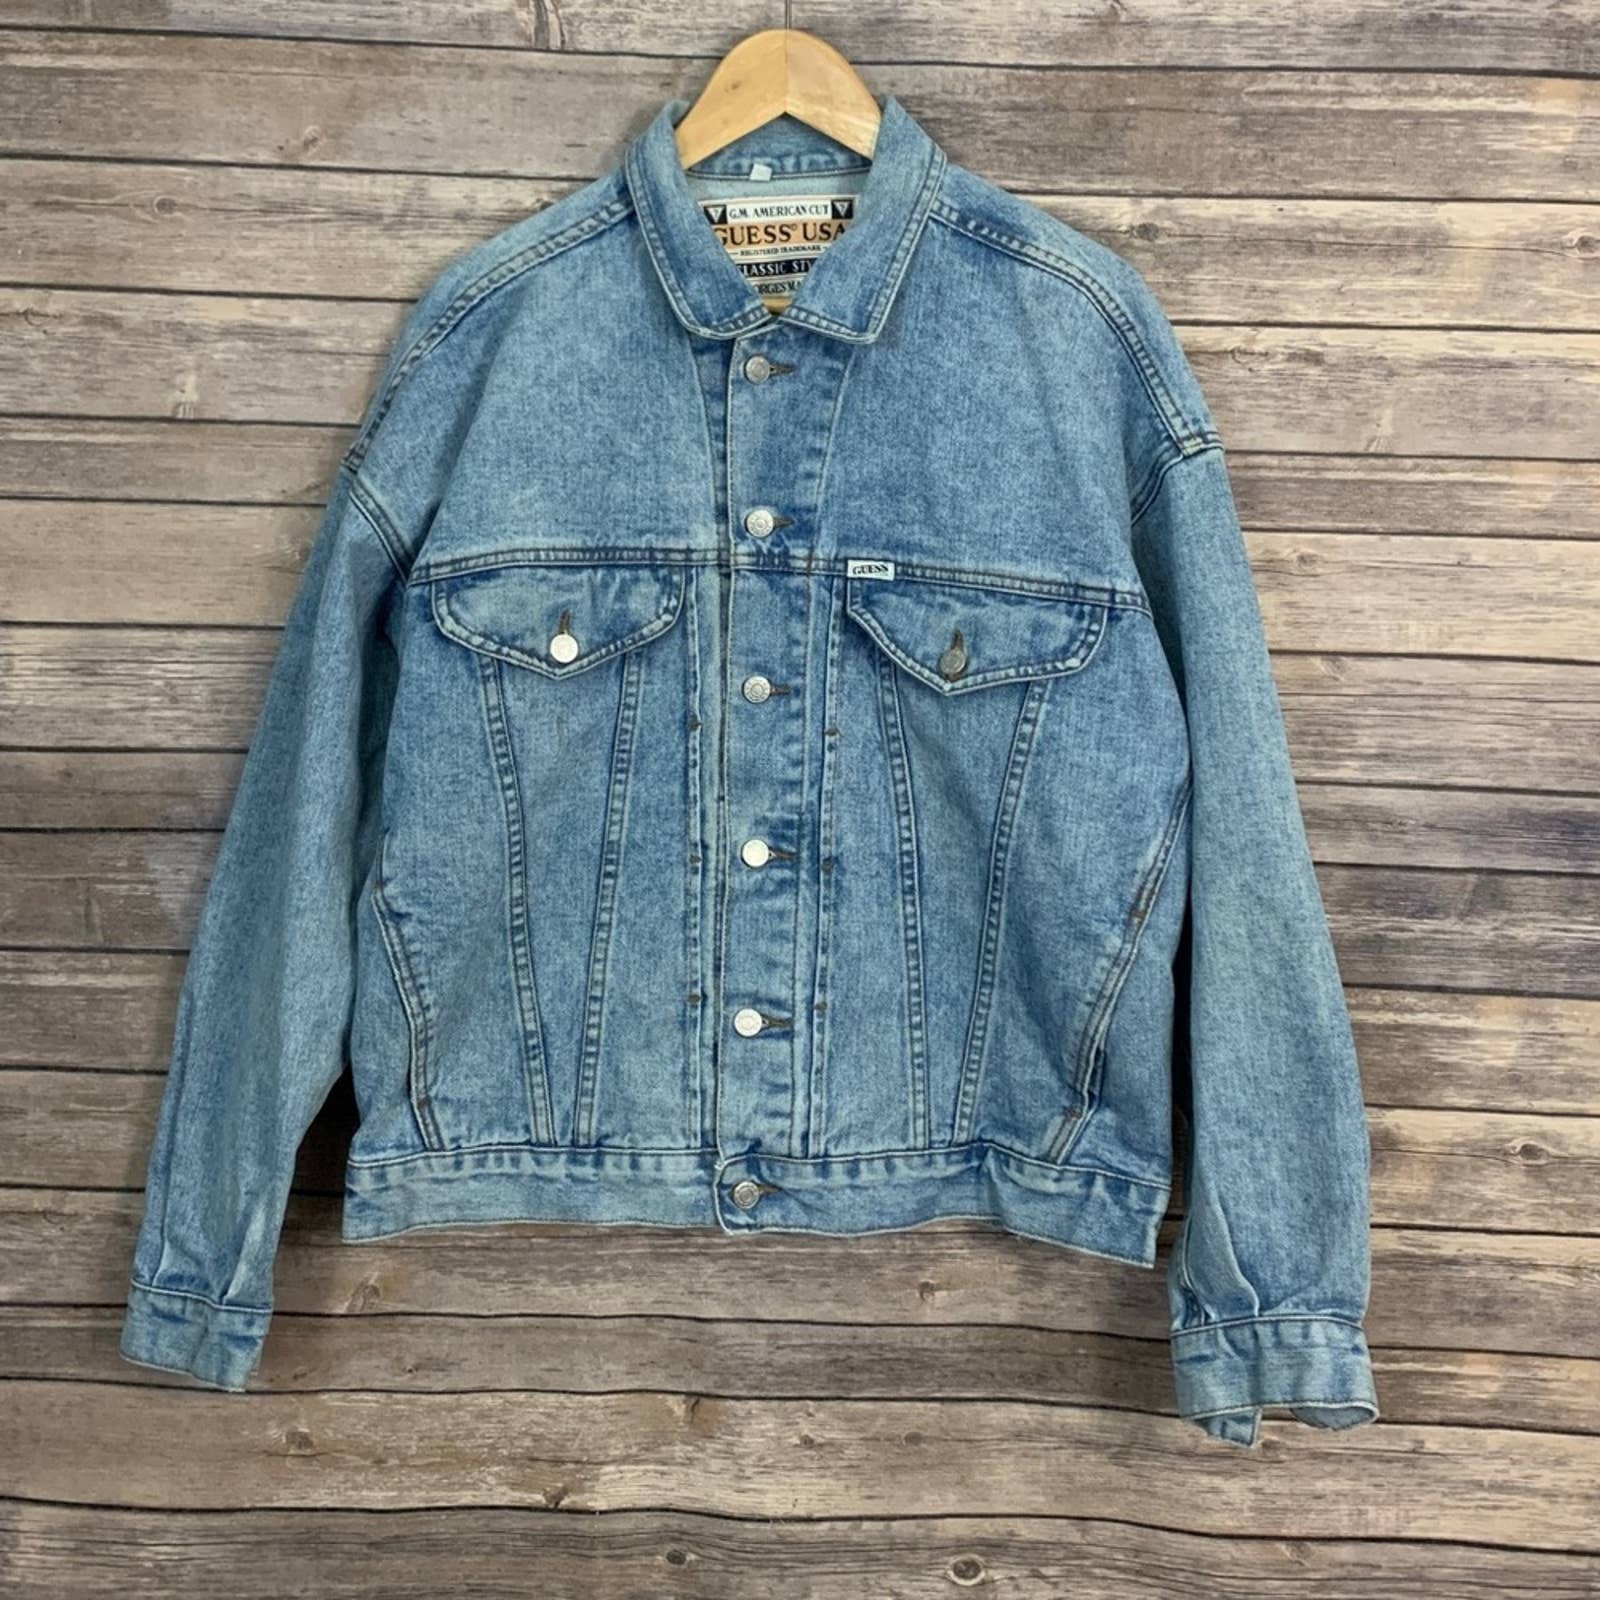 GUESS Jeans Denim Jacket Retro Vintage Spell Out G81 Black Distressed ...